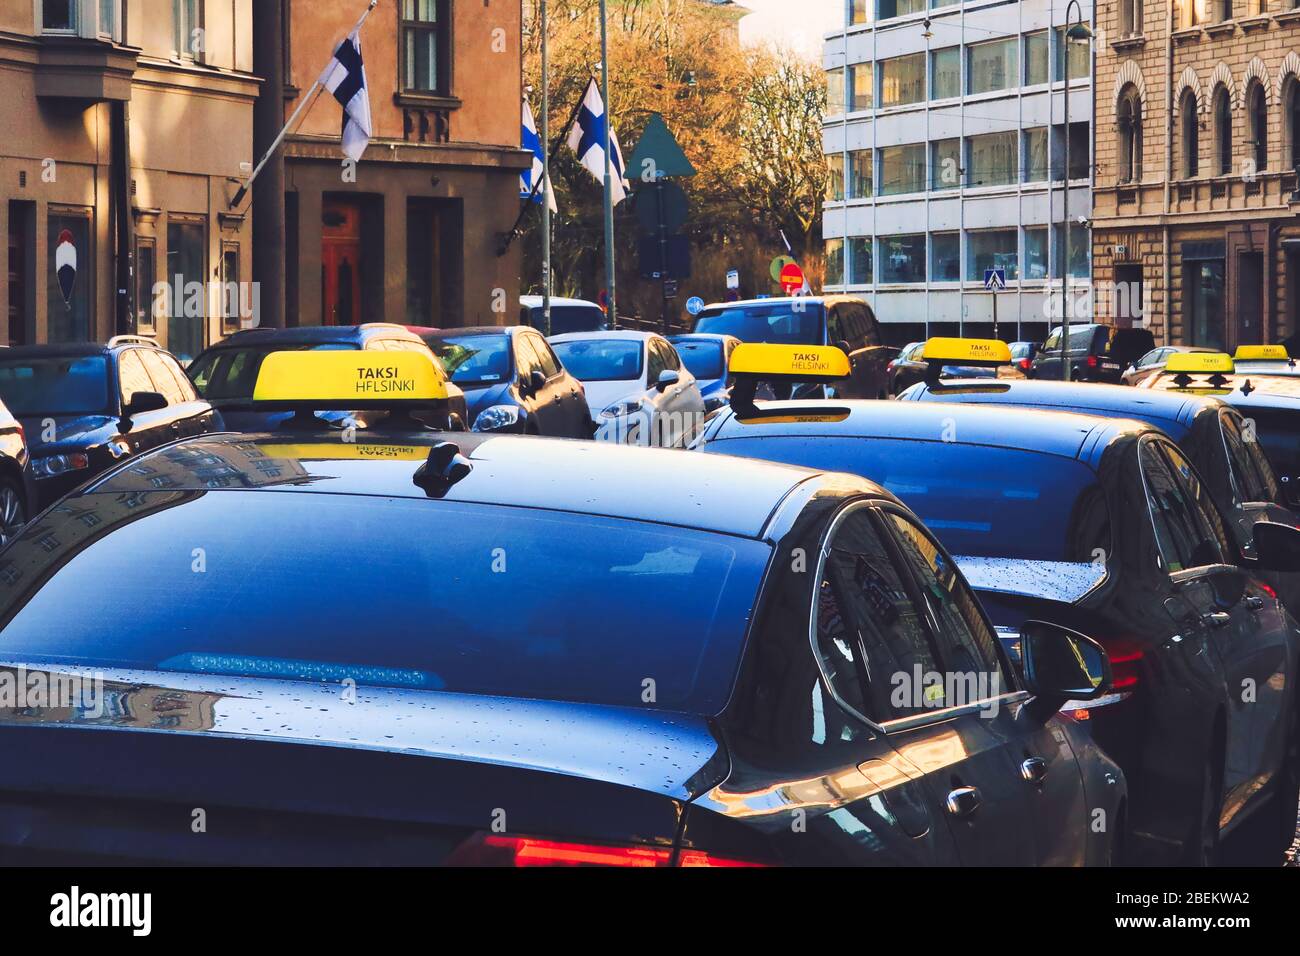 Taxi cab line up by street in Helsinki, Finland. Image contains intentional grain from artistic filters. Identifiable elements removed. Stock Photo